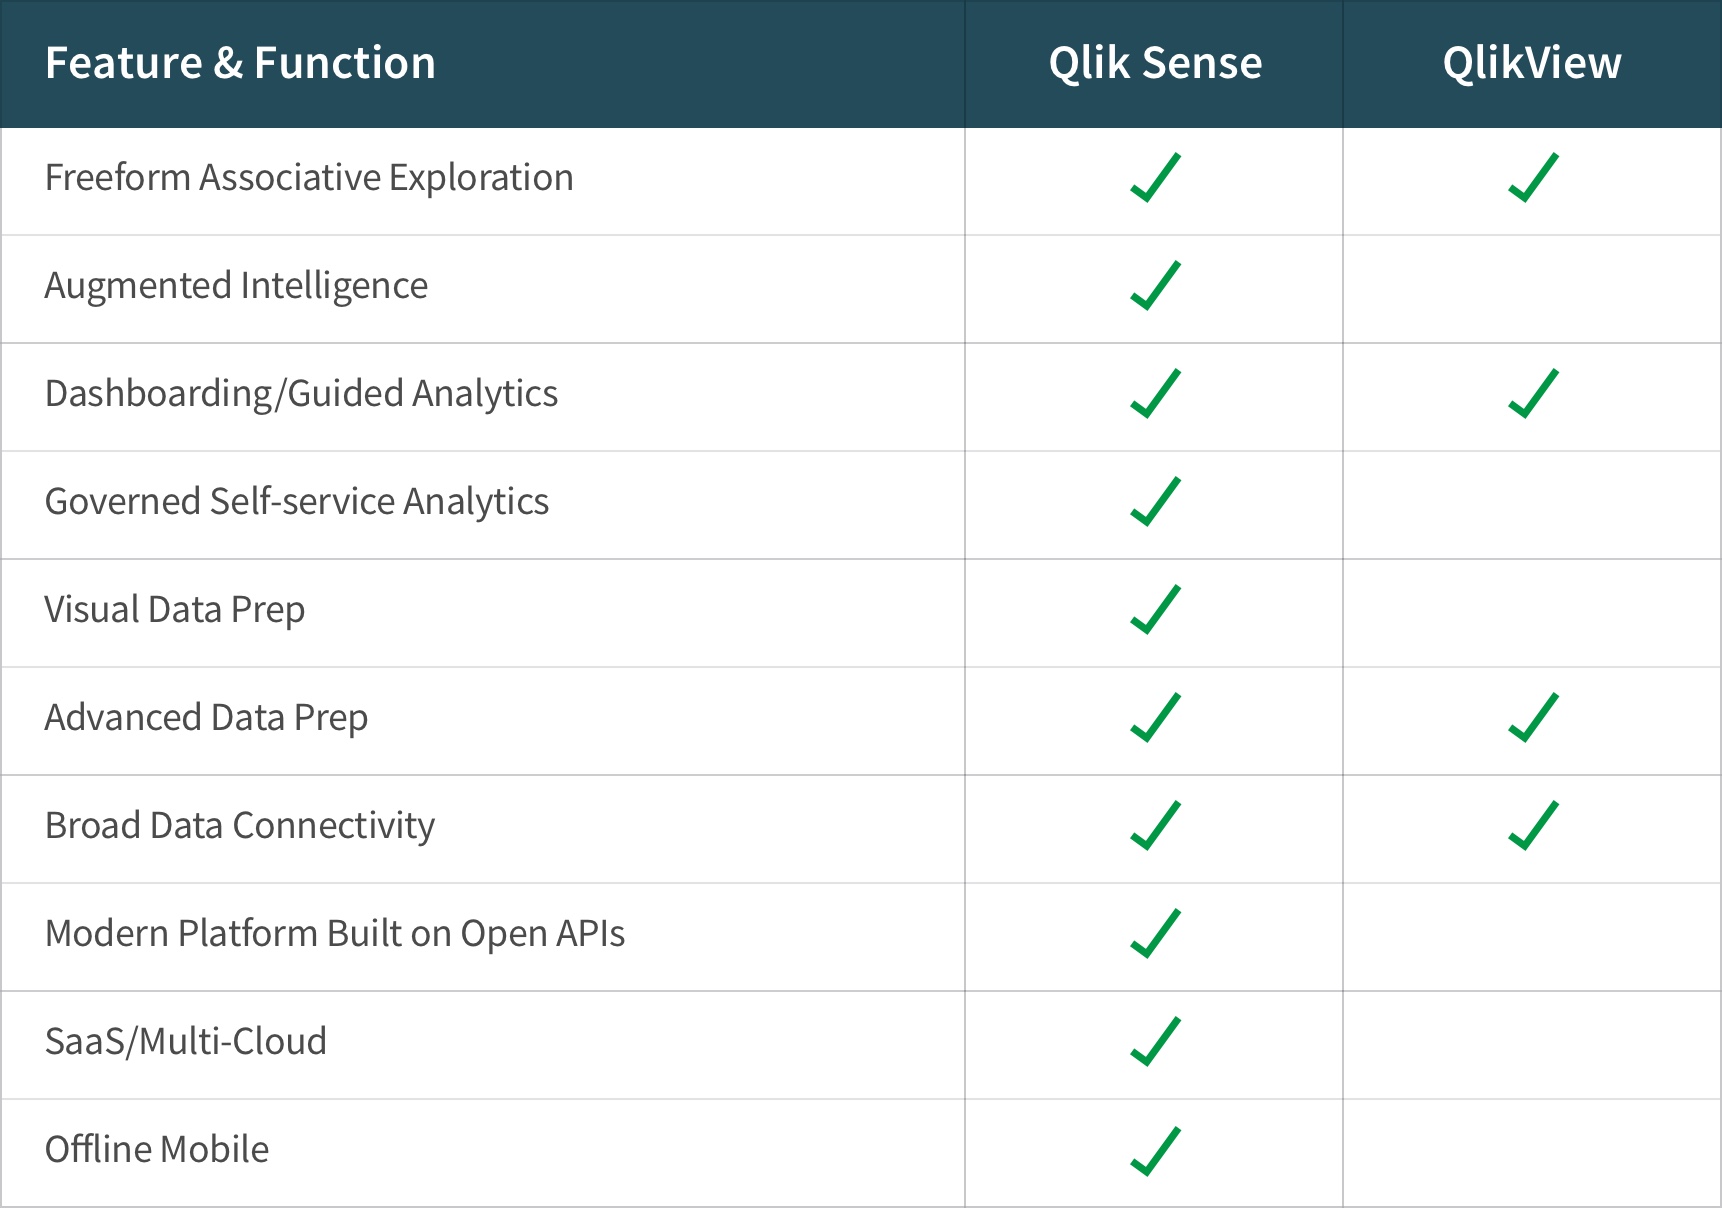 features and functions of both Qlik Sense and QlikView